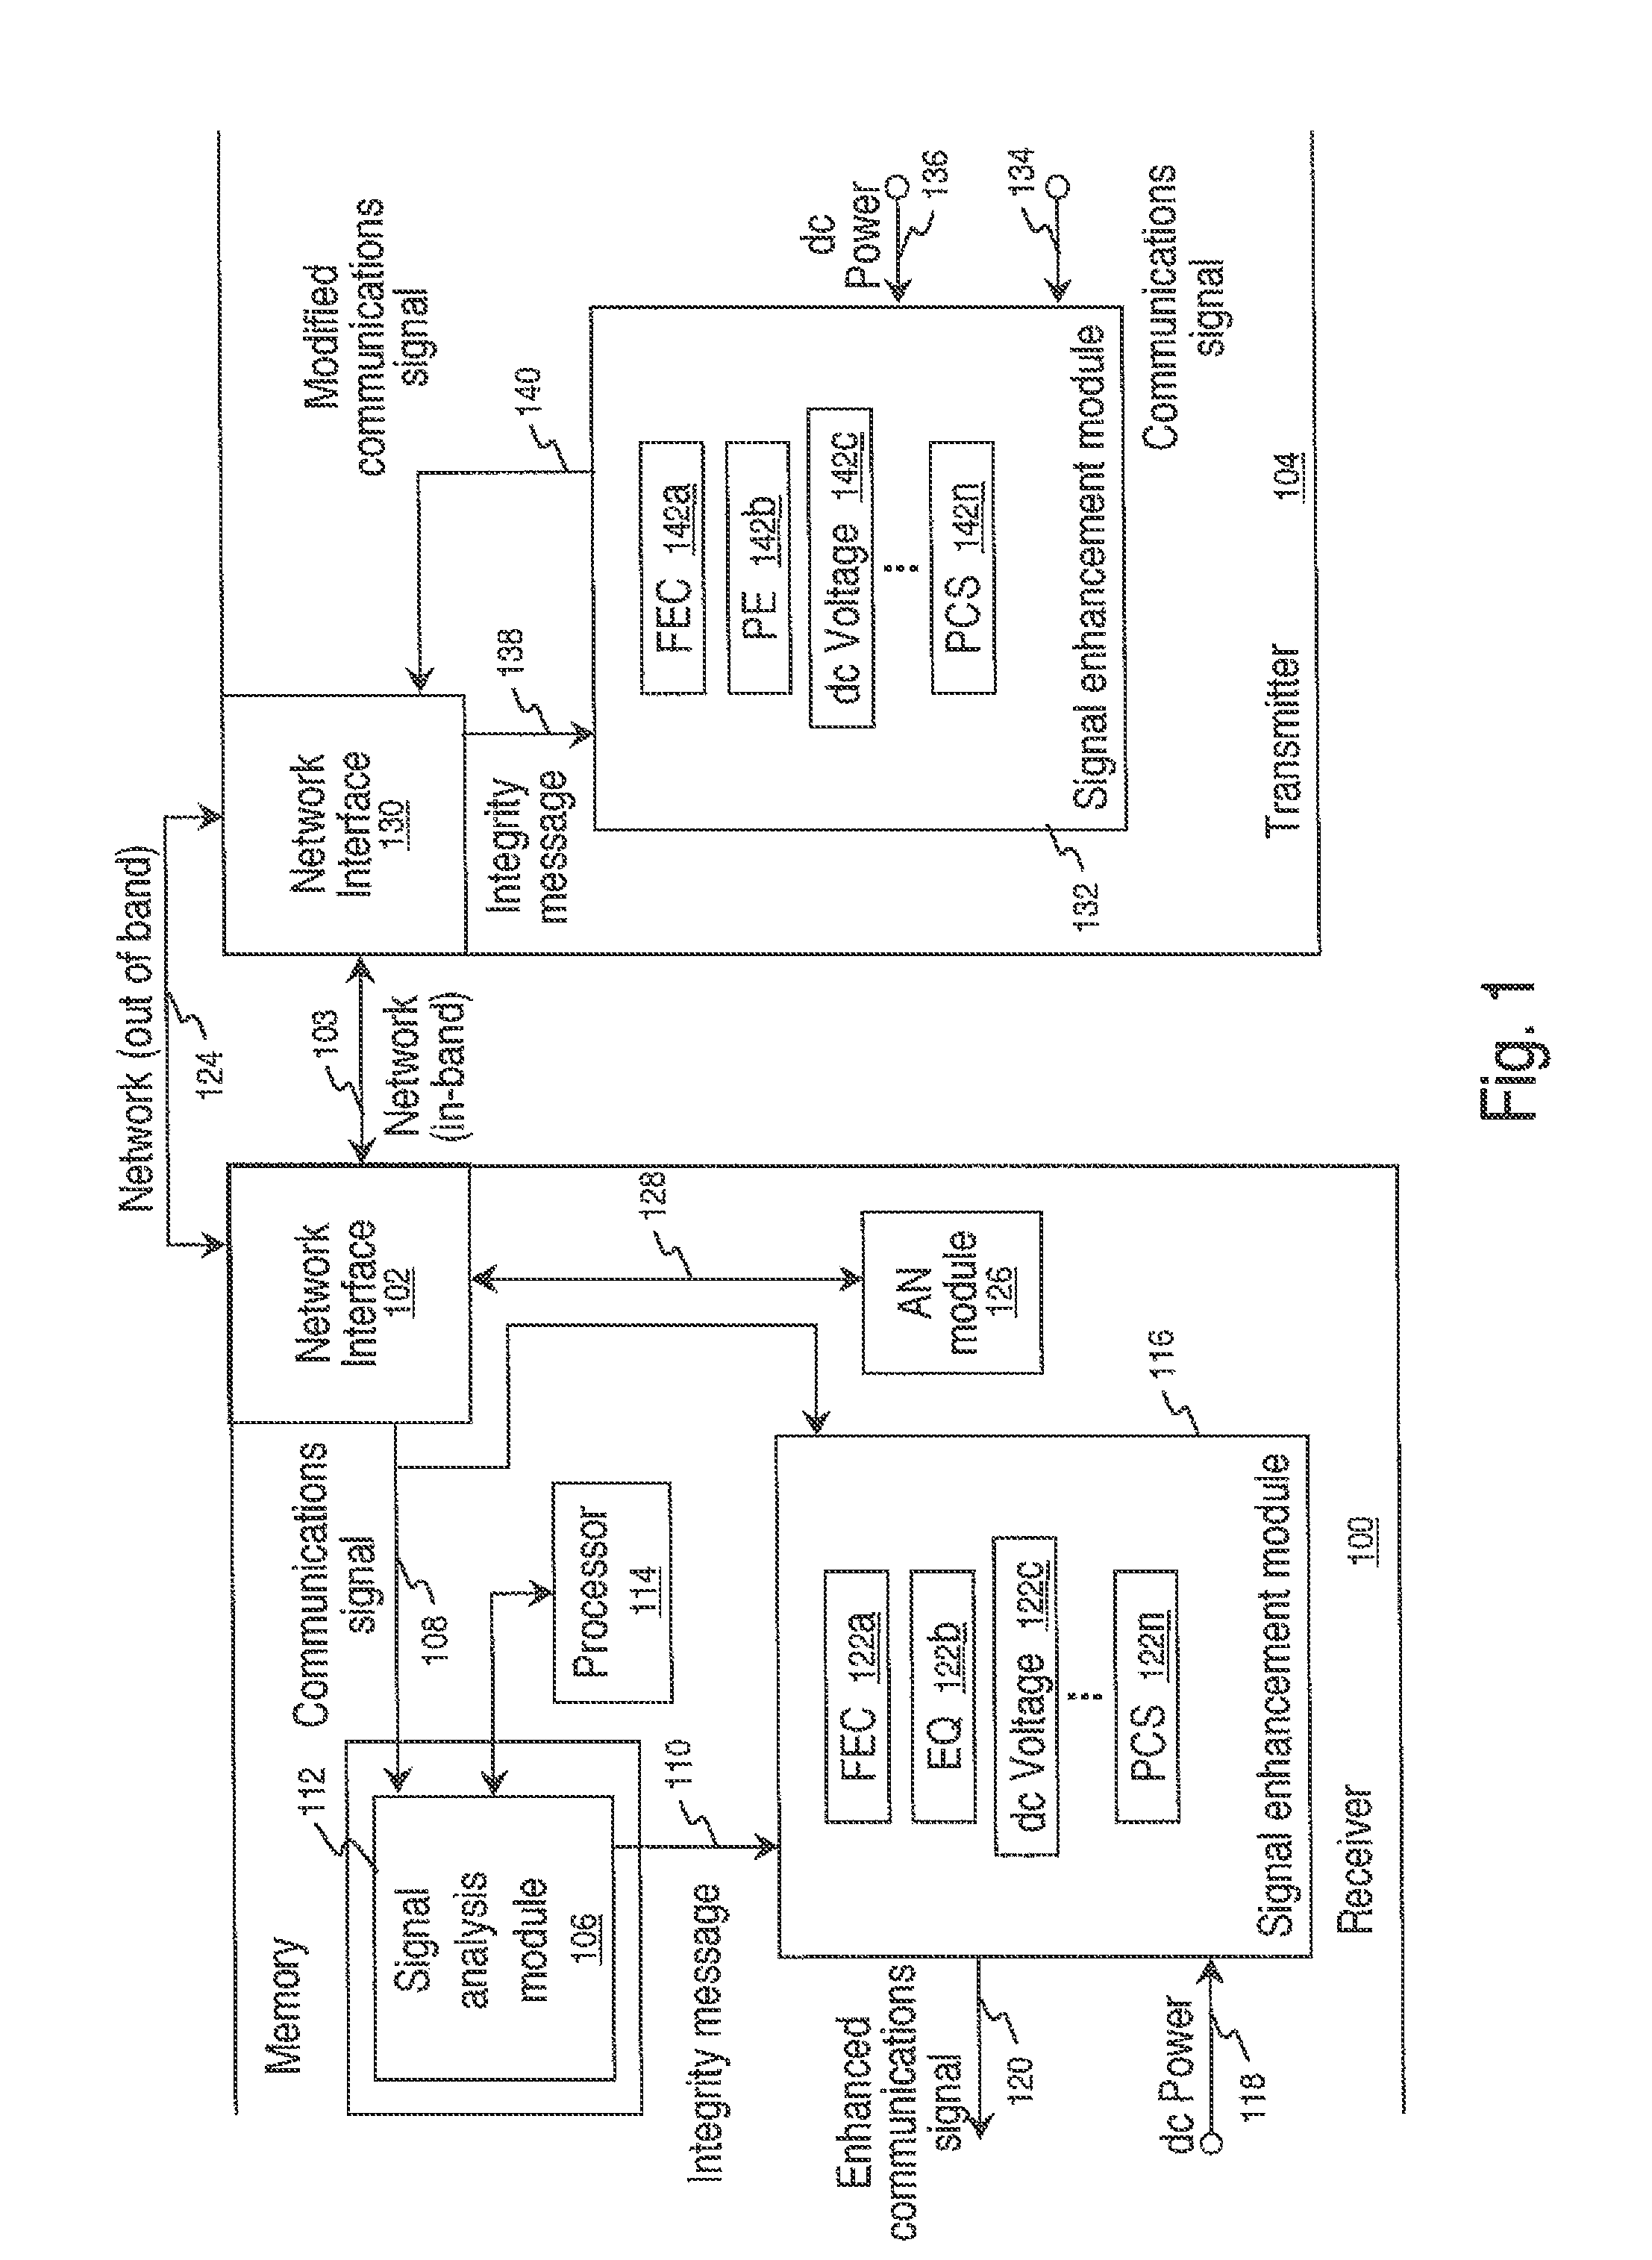 System and method for closed-loop optical network power backoff